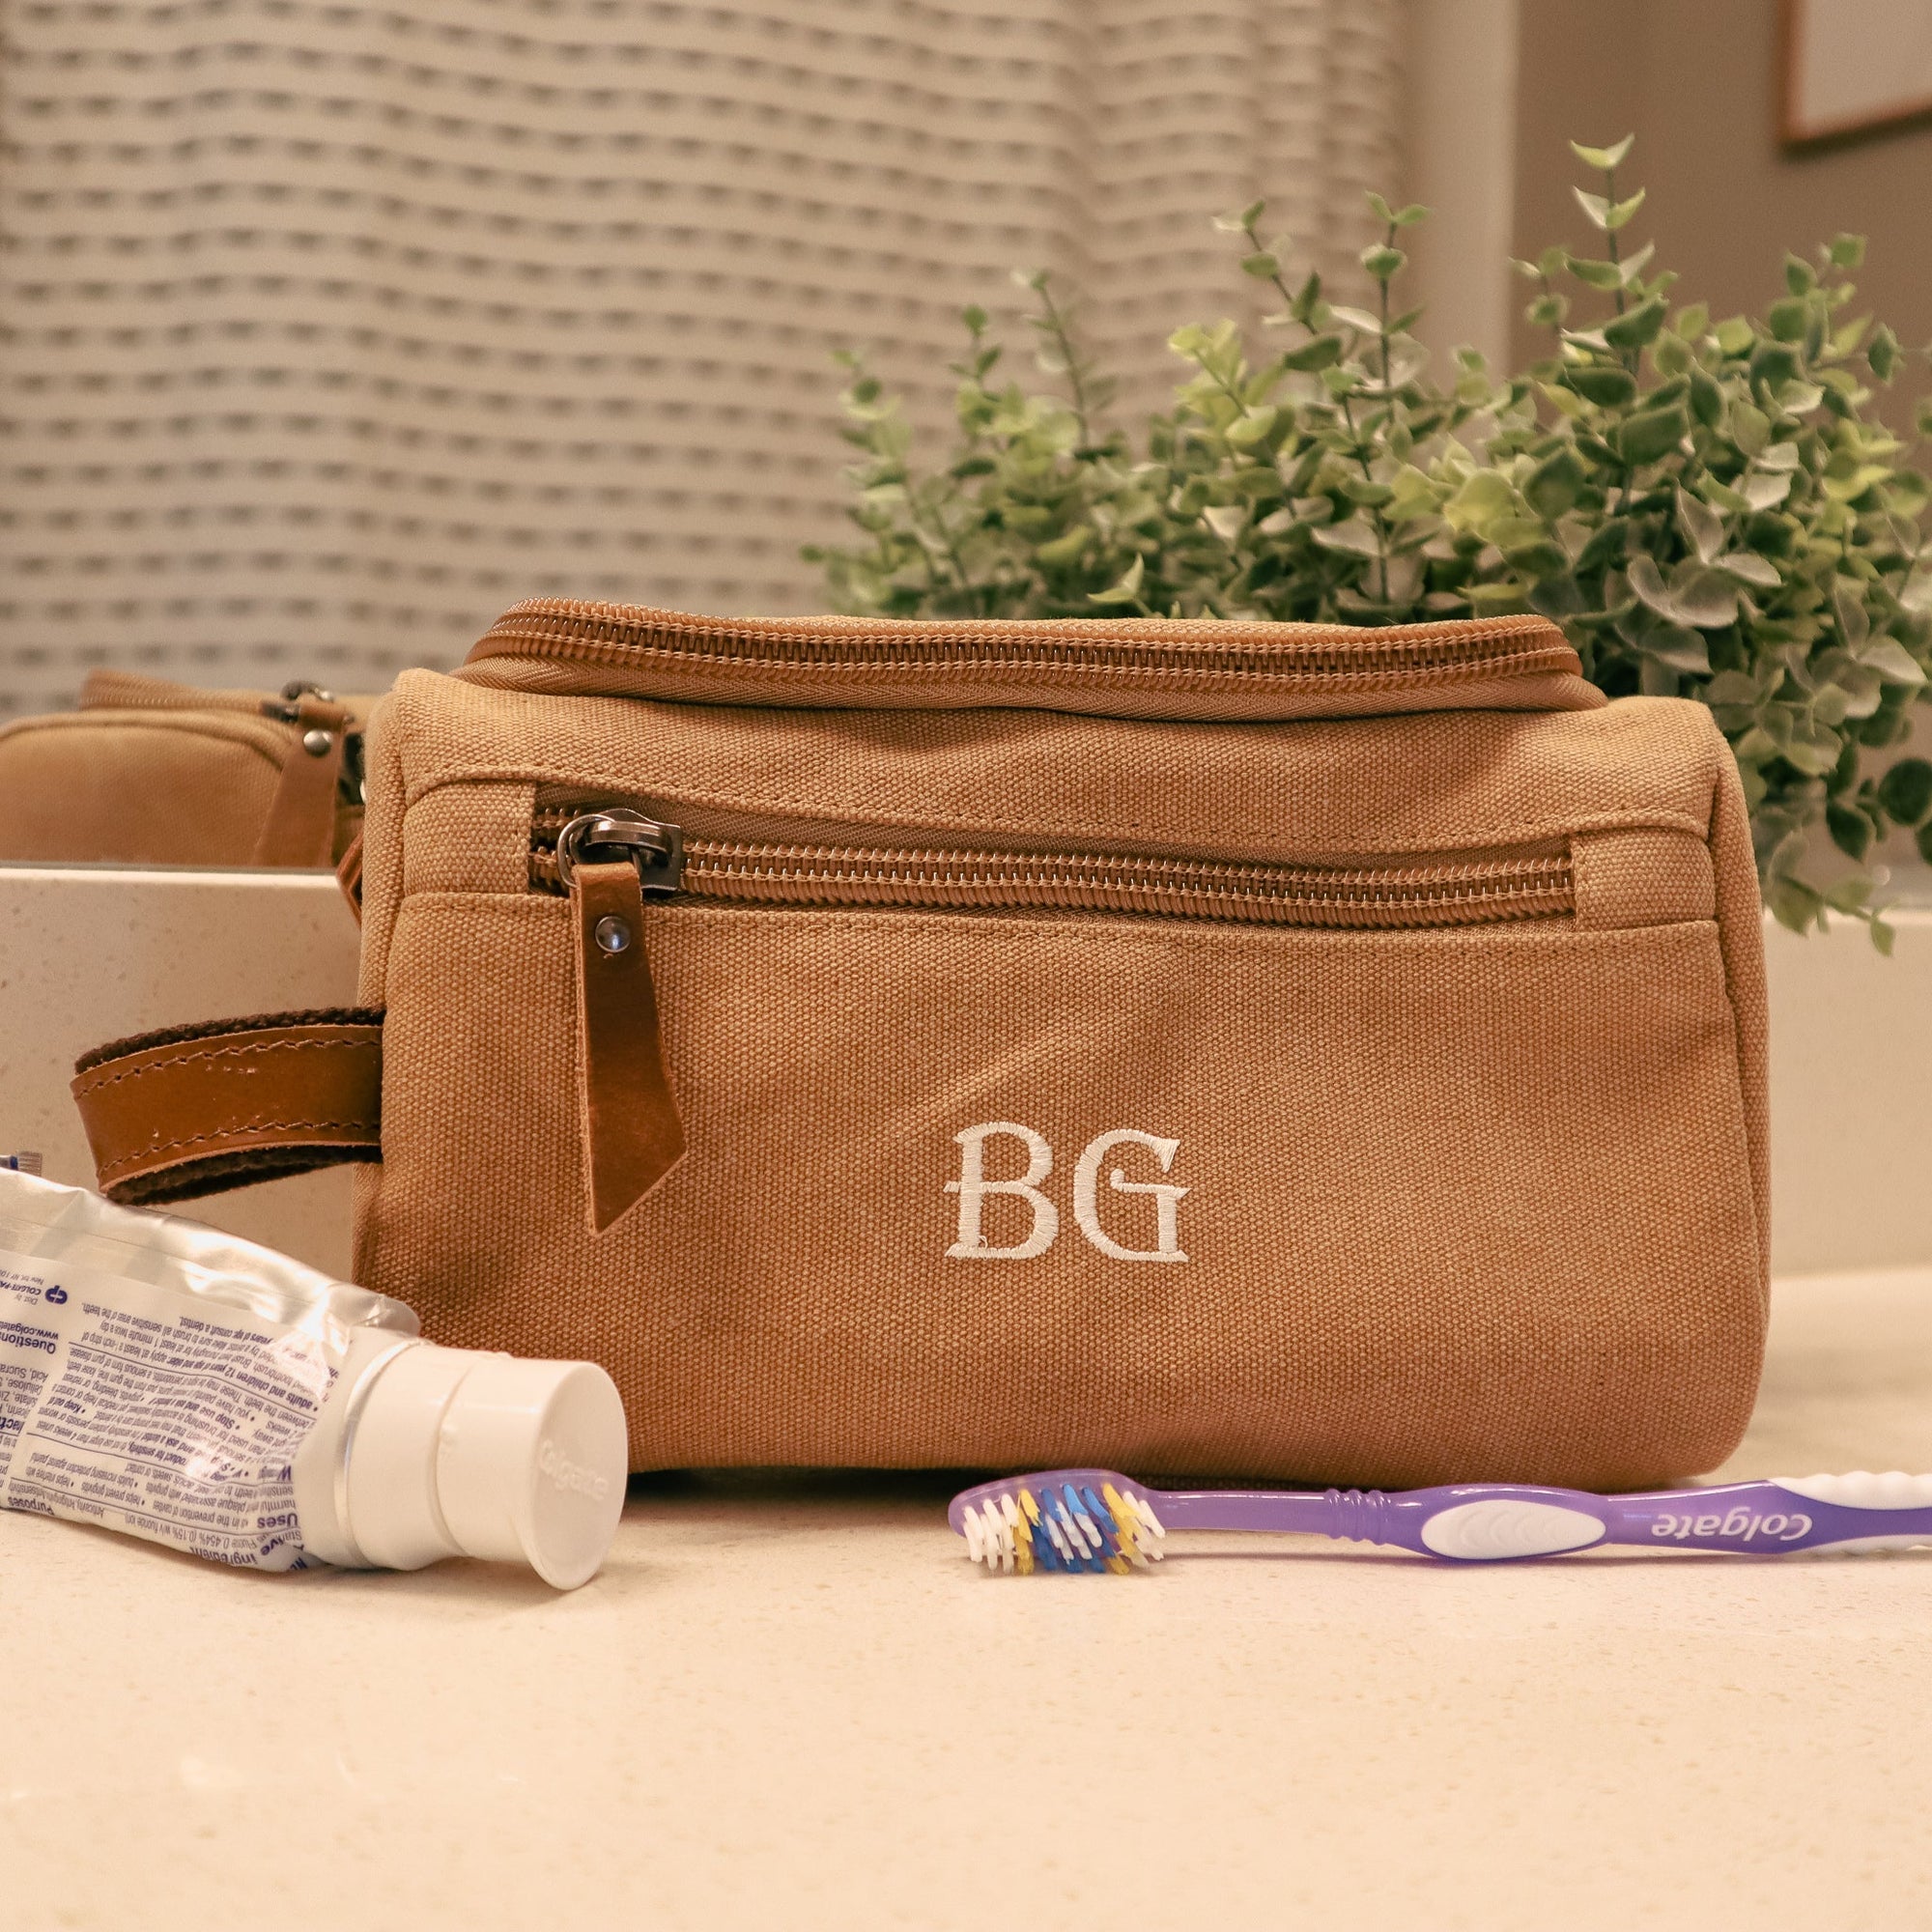 Personalized Toiletry Bag, Photo Toiletry Bags